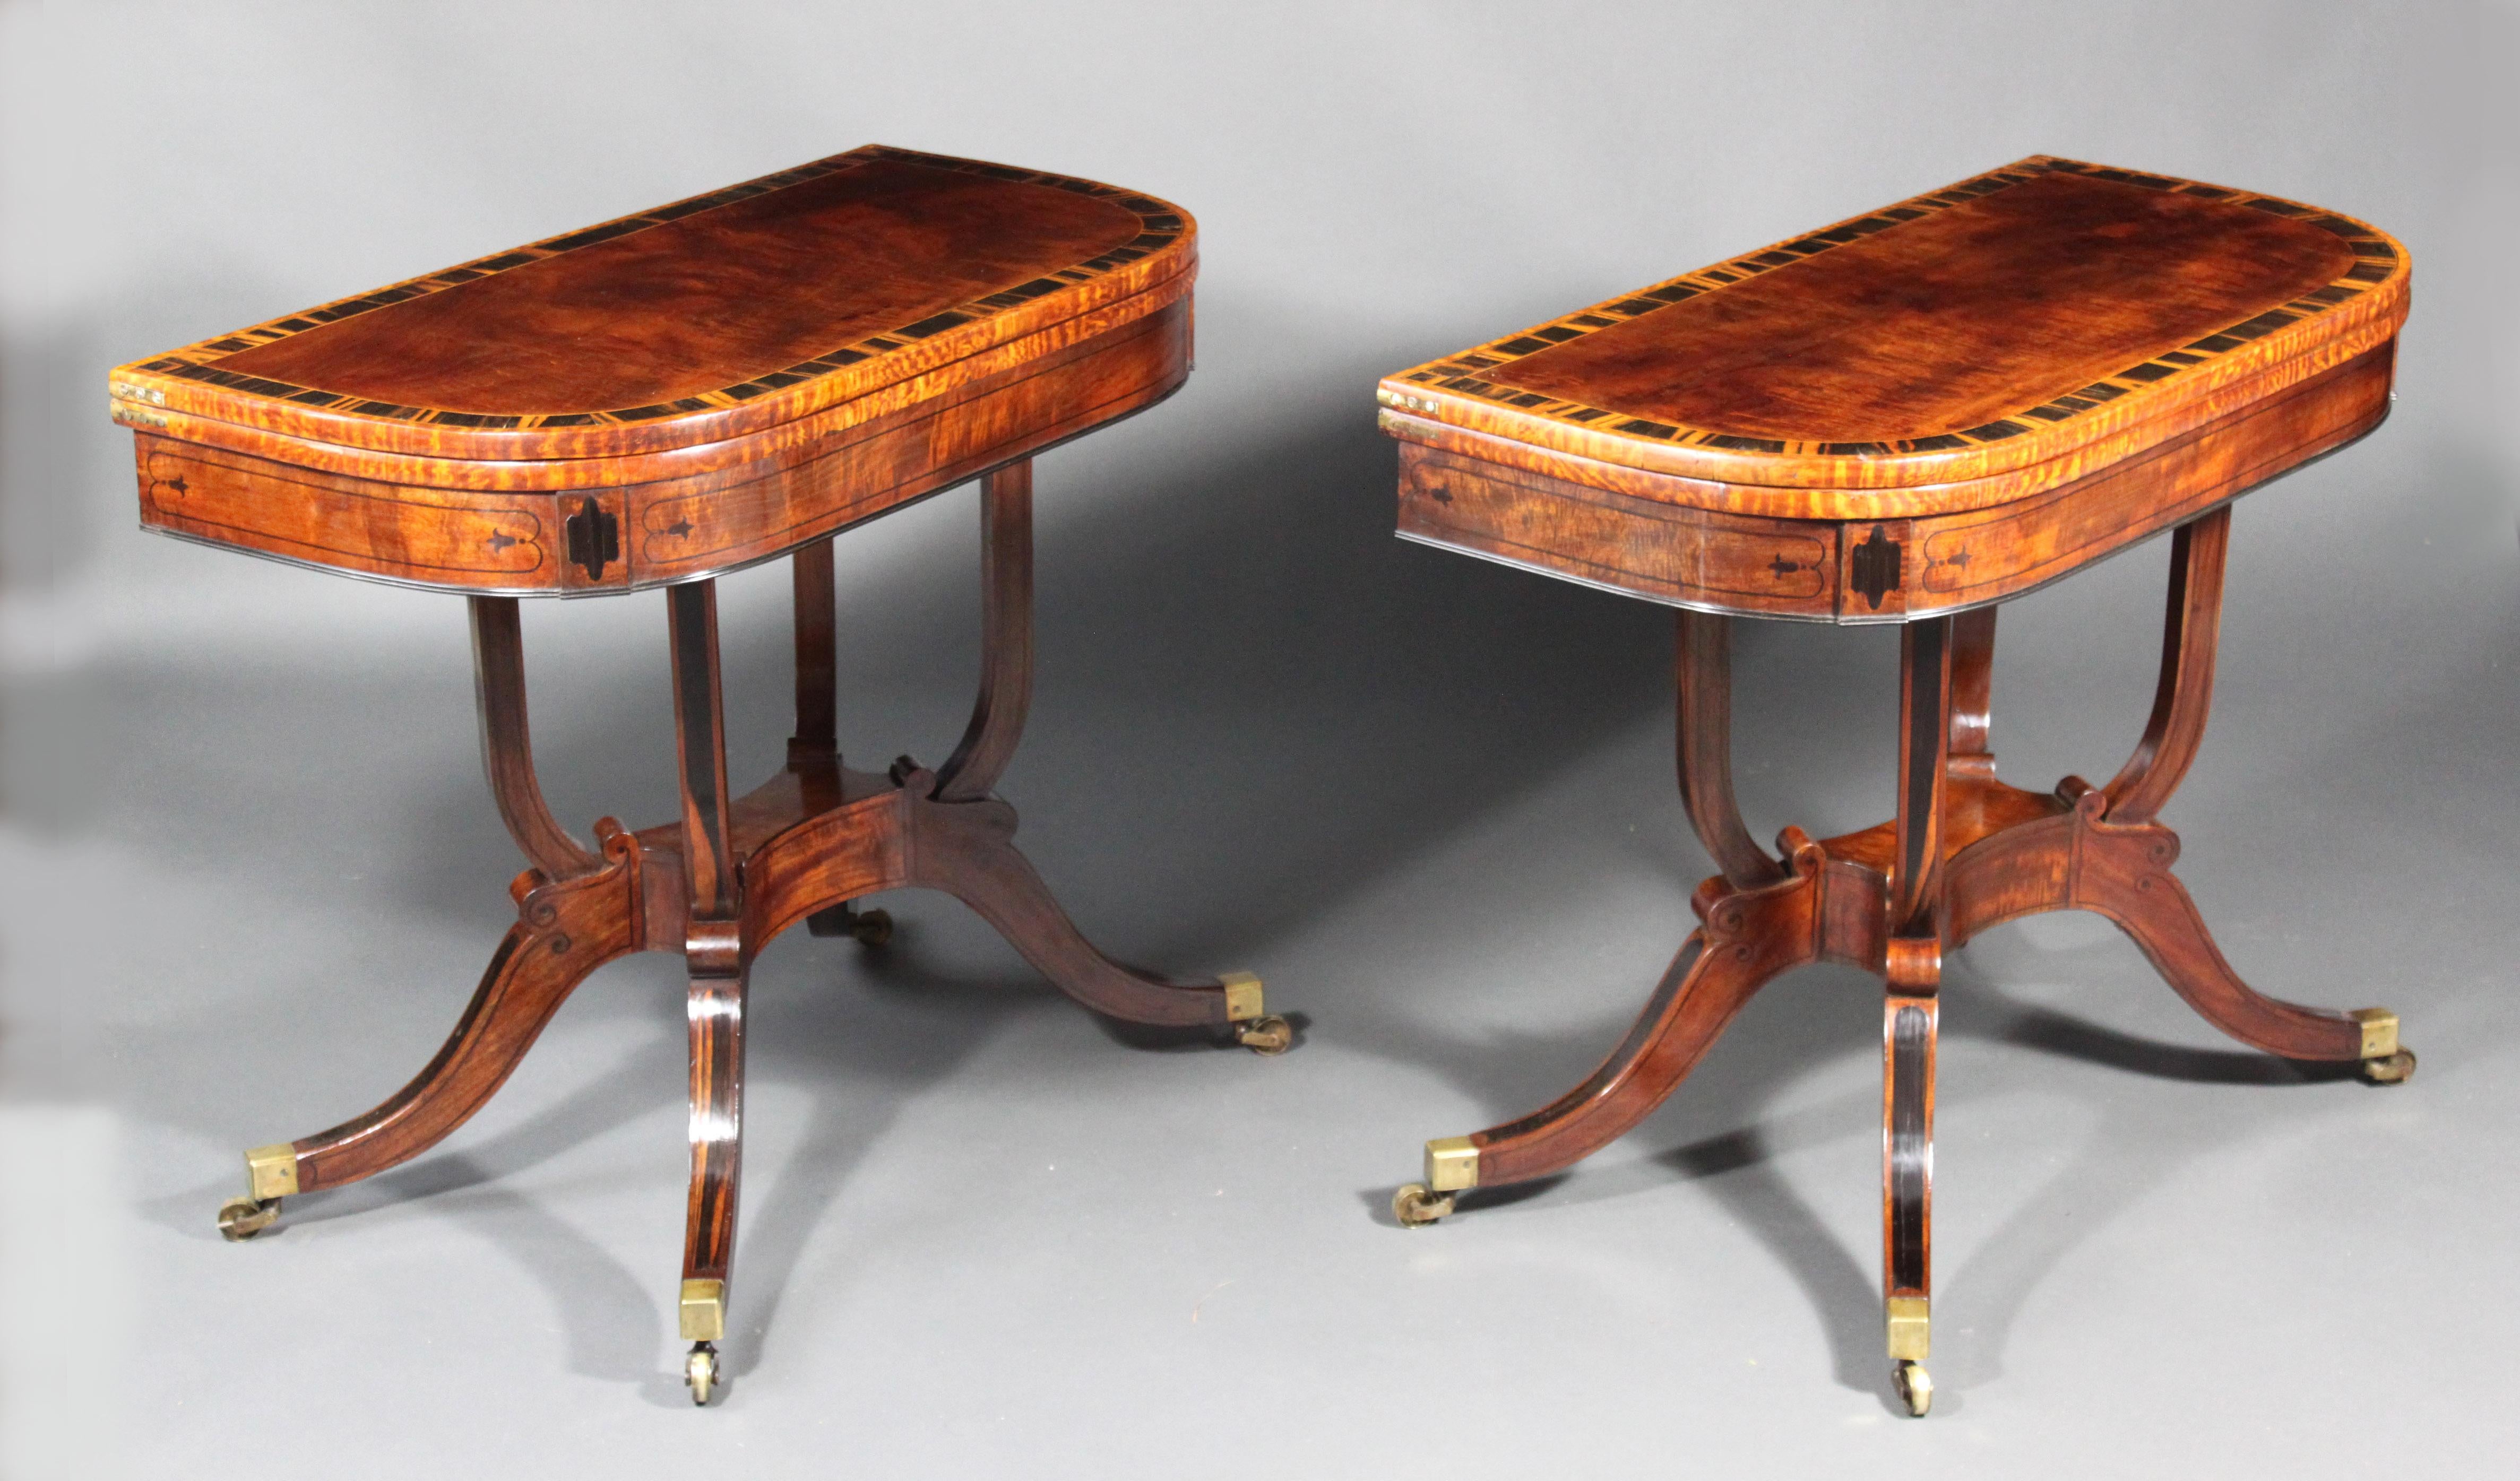 A rare and fine set of Regency drawing room furniture comprising a pair of card tables and matching sofa table: made in figured mahogany; the tops with Coromandel and satinwood cross-banding; the frieze with handsome ebony inlay; the bases with